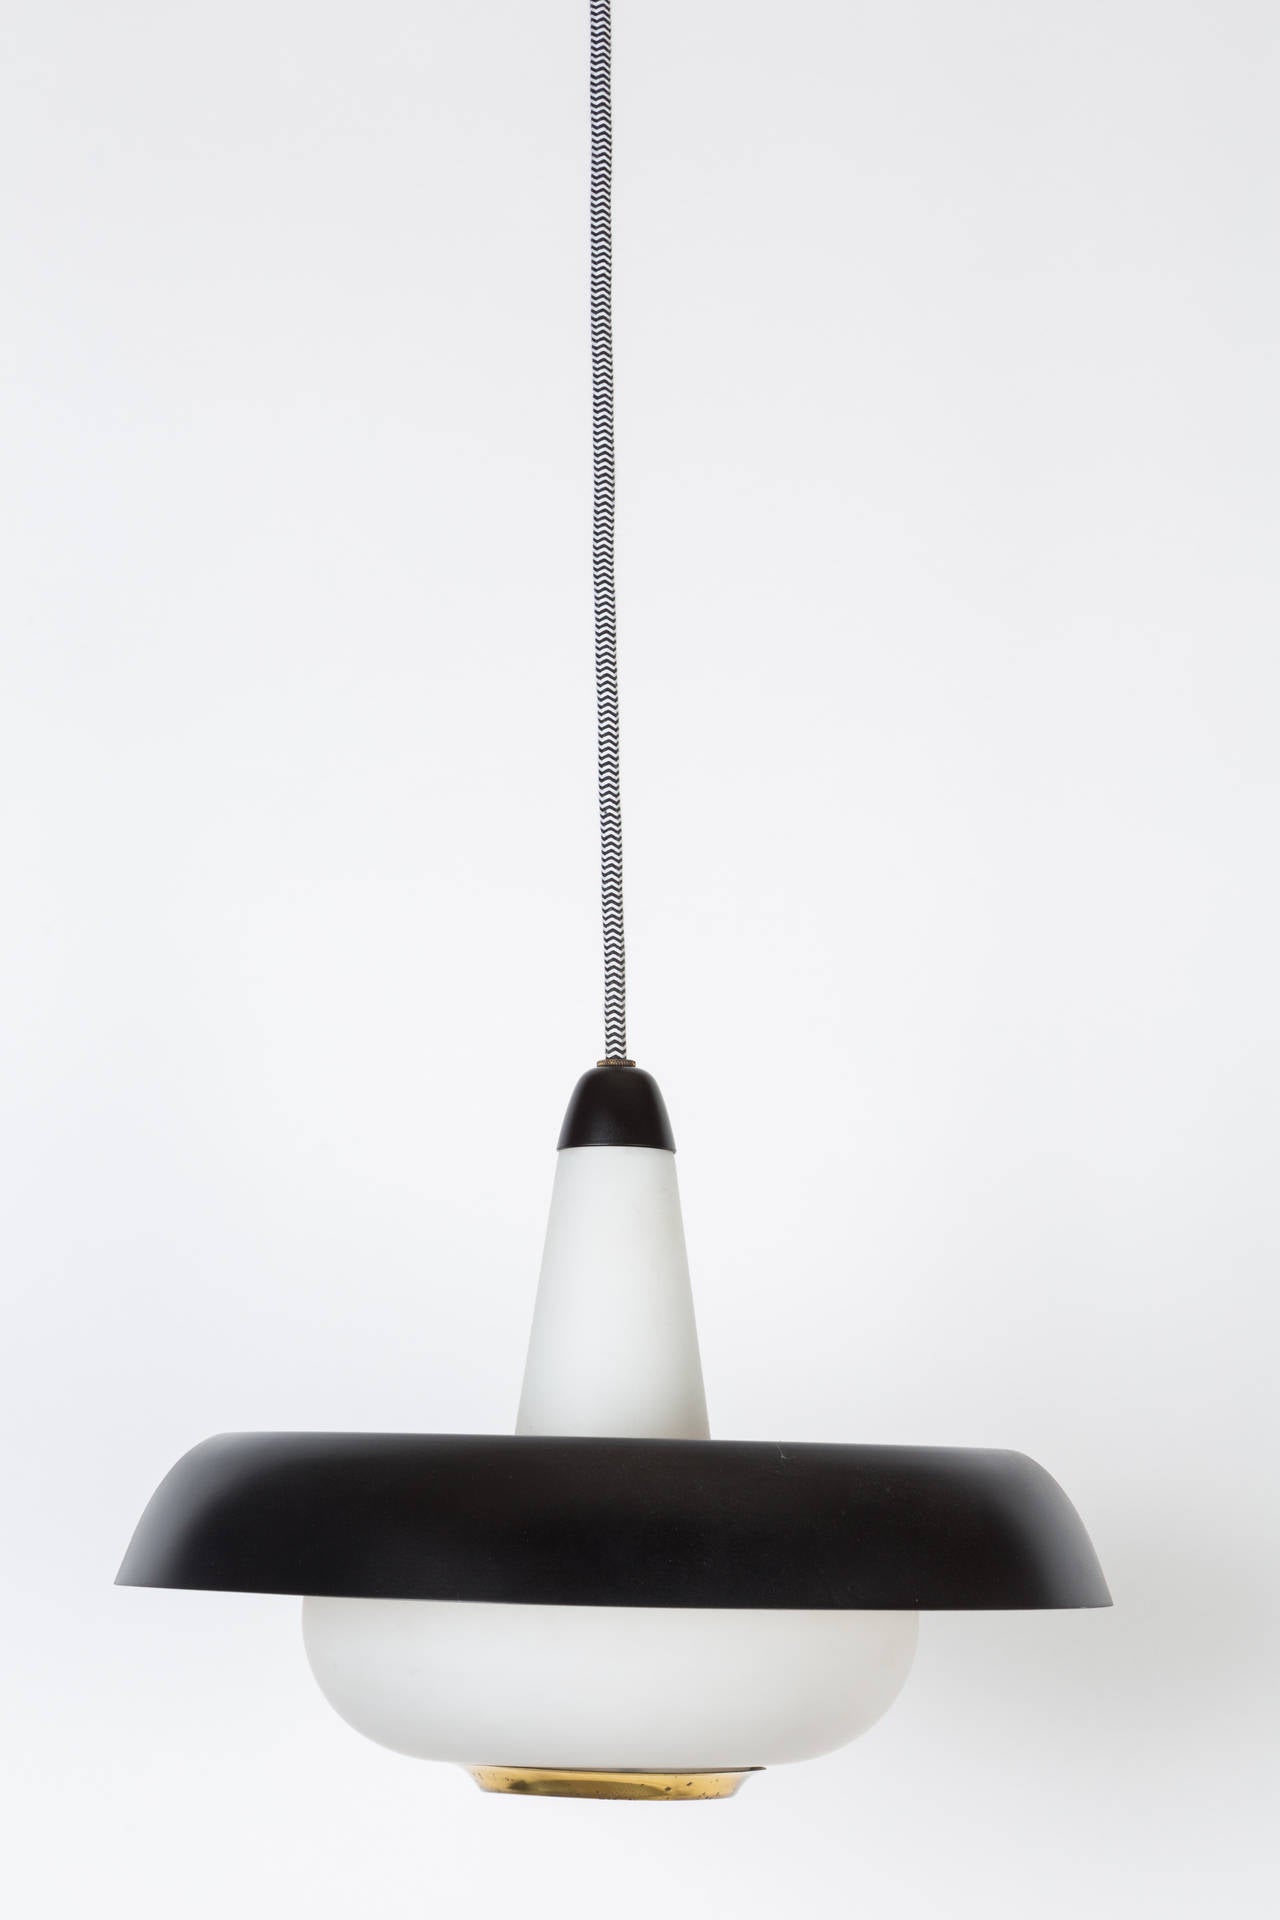 1950s Stilnovo Black Metal and Glass Pendant Lamp. Executed in opaline glass, brass and painted metal. Height is adjustable to desired length. 
